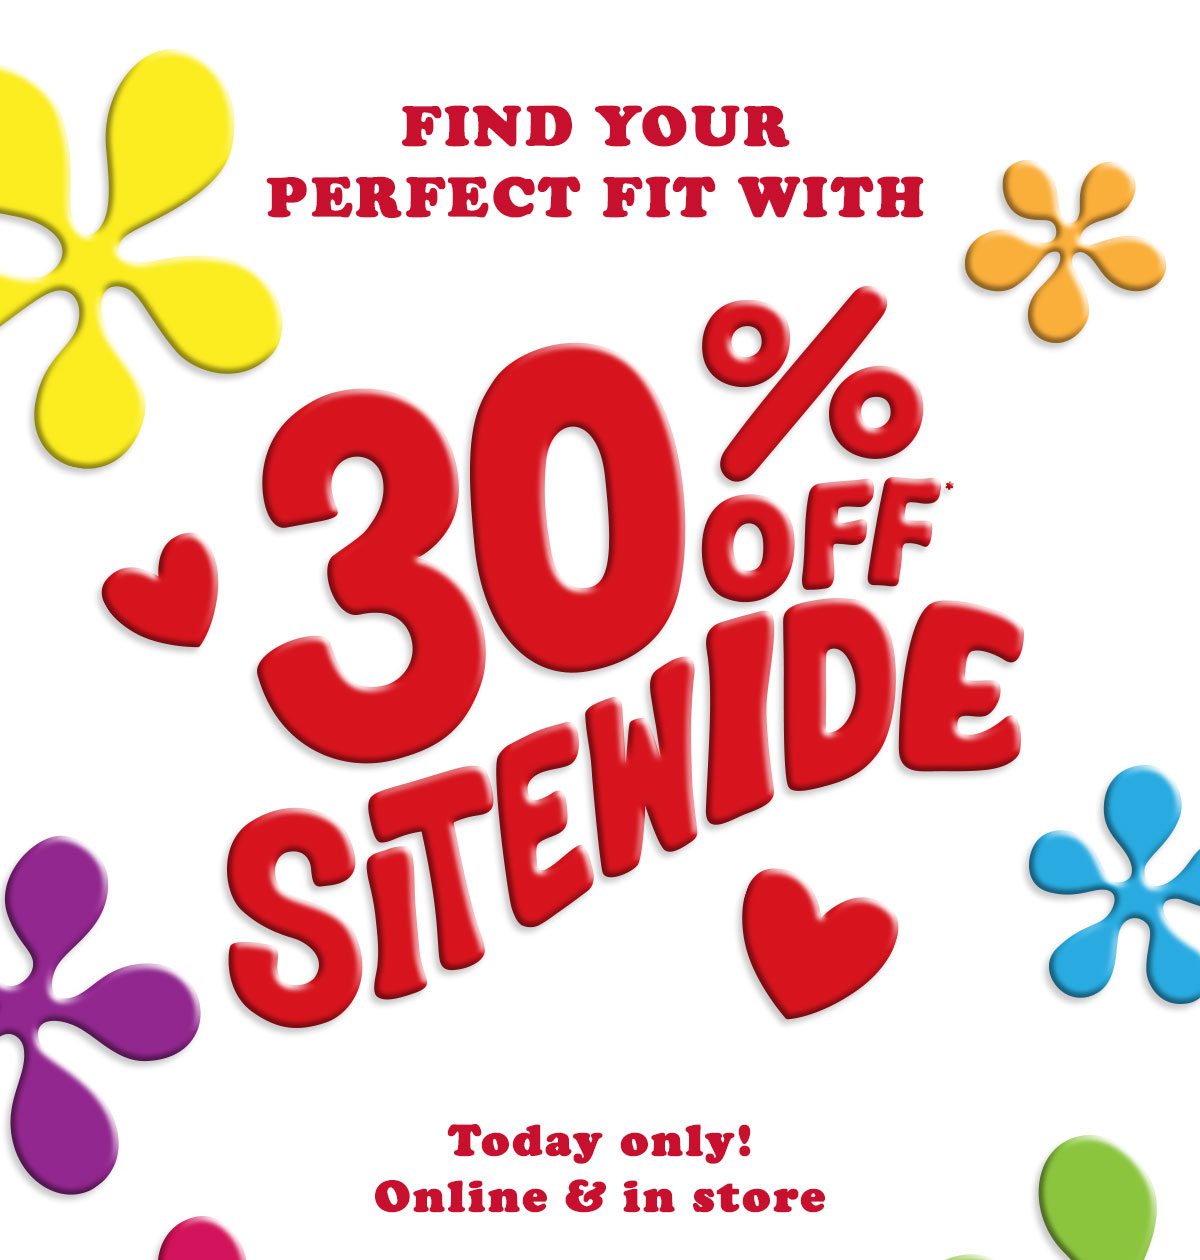 Find your perfect fit with 30% off* sitewide! Today only! Online and in store.